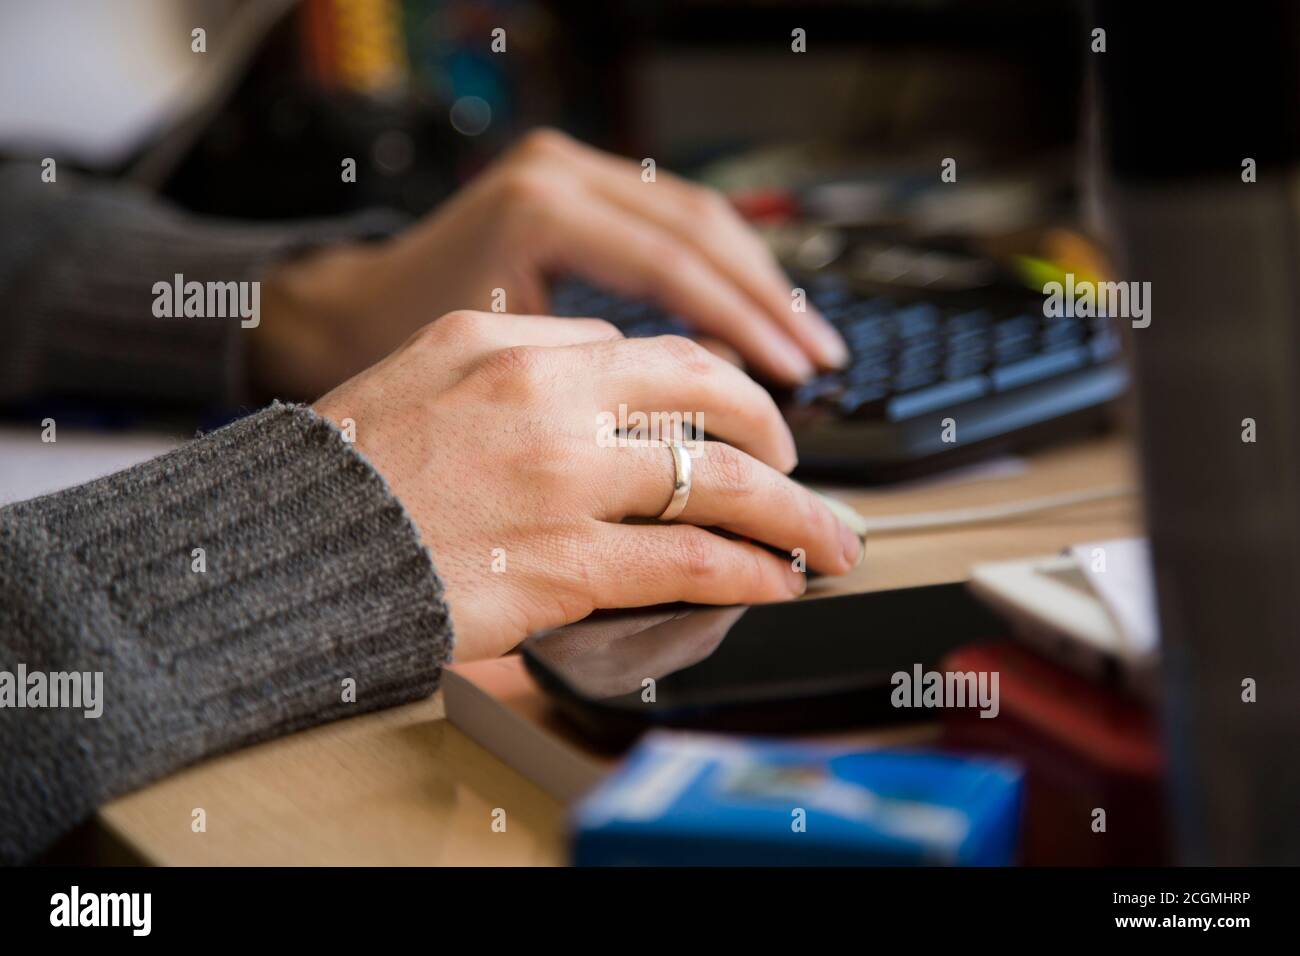 Woman Hands Touching Mouse and Keyboard on Table Stock Photo